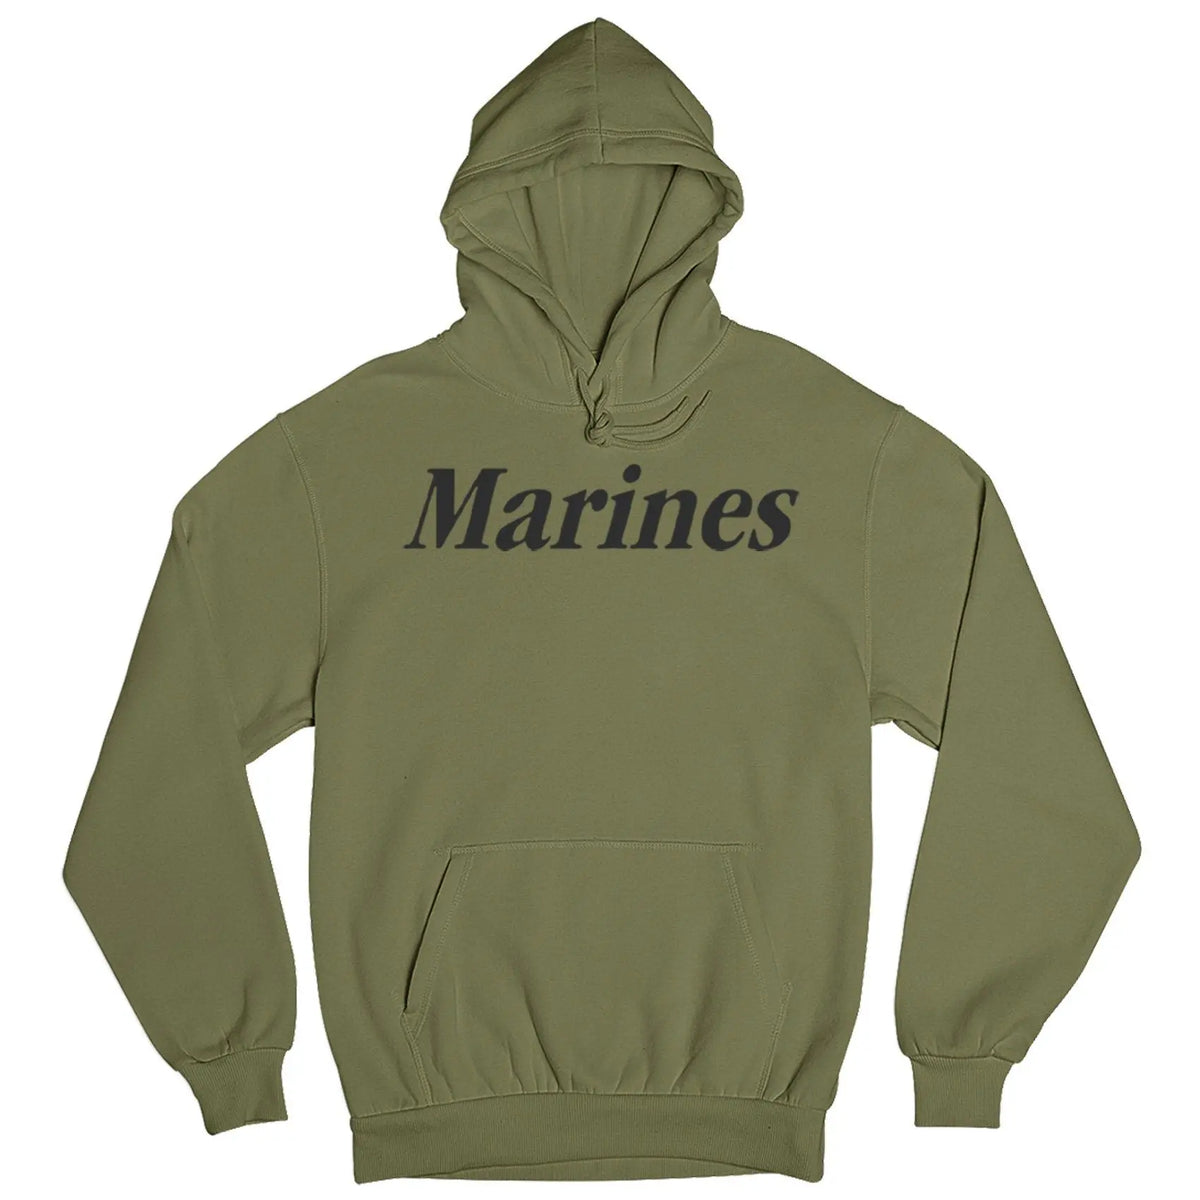 Limited Edition Marines Hoodie (CPT's SPECIAL Extra $8 Discount) - Marine Corps Direct